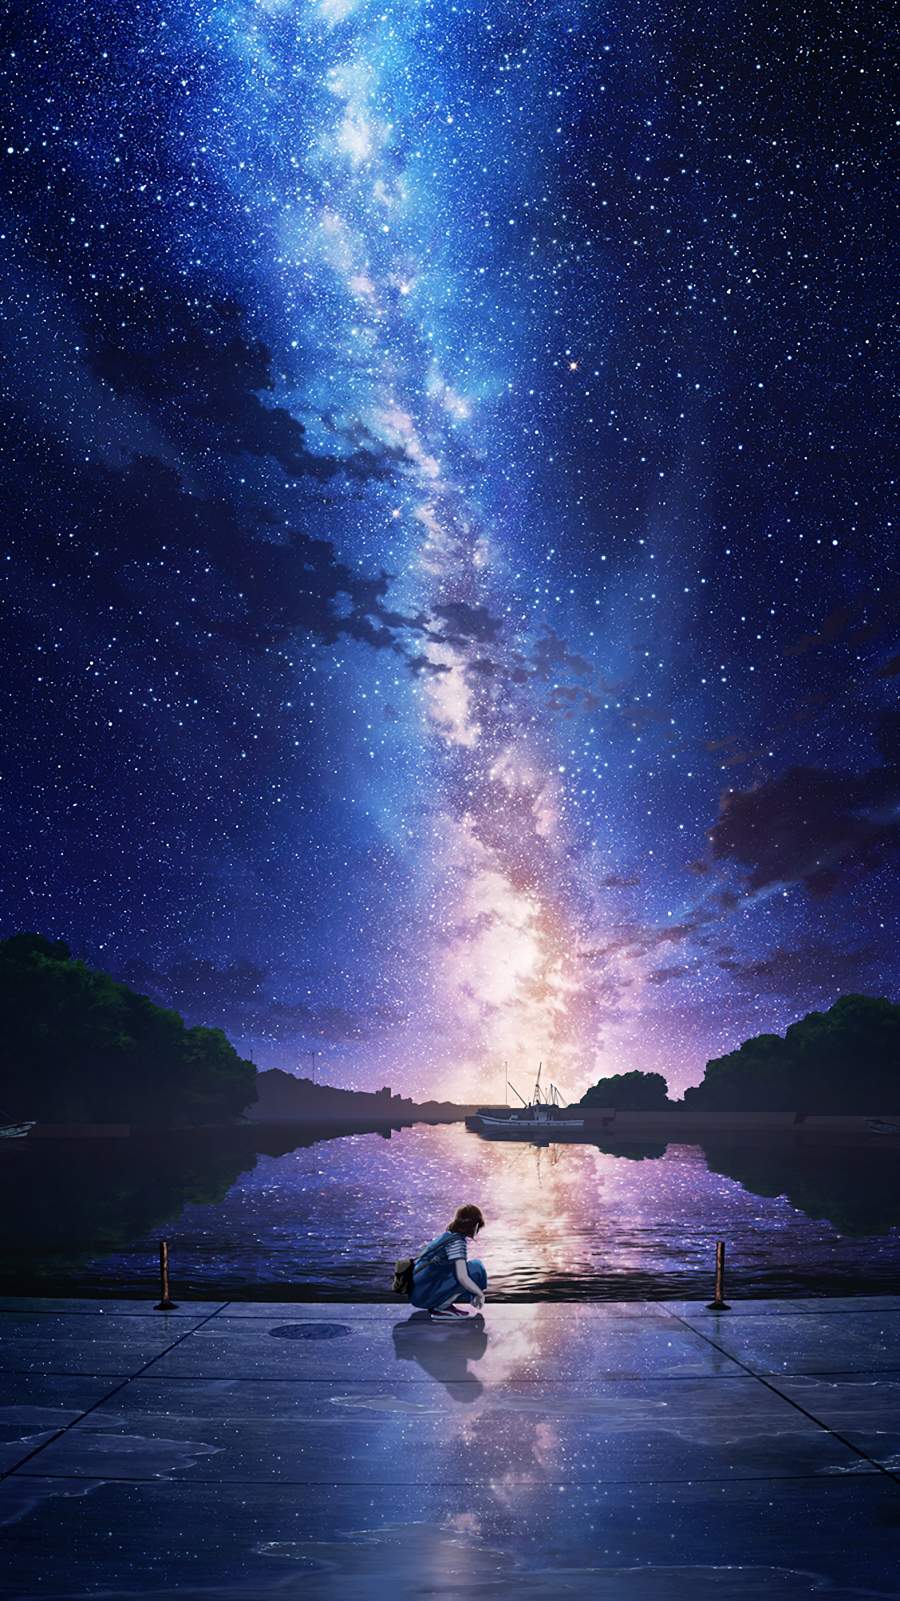 Anime Sky Iphone Wallpapers